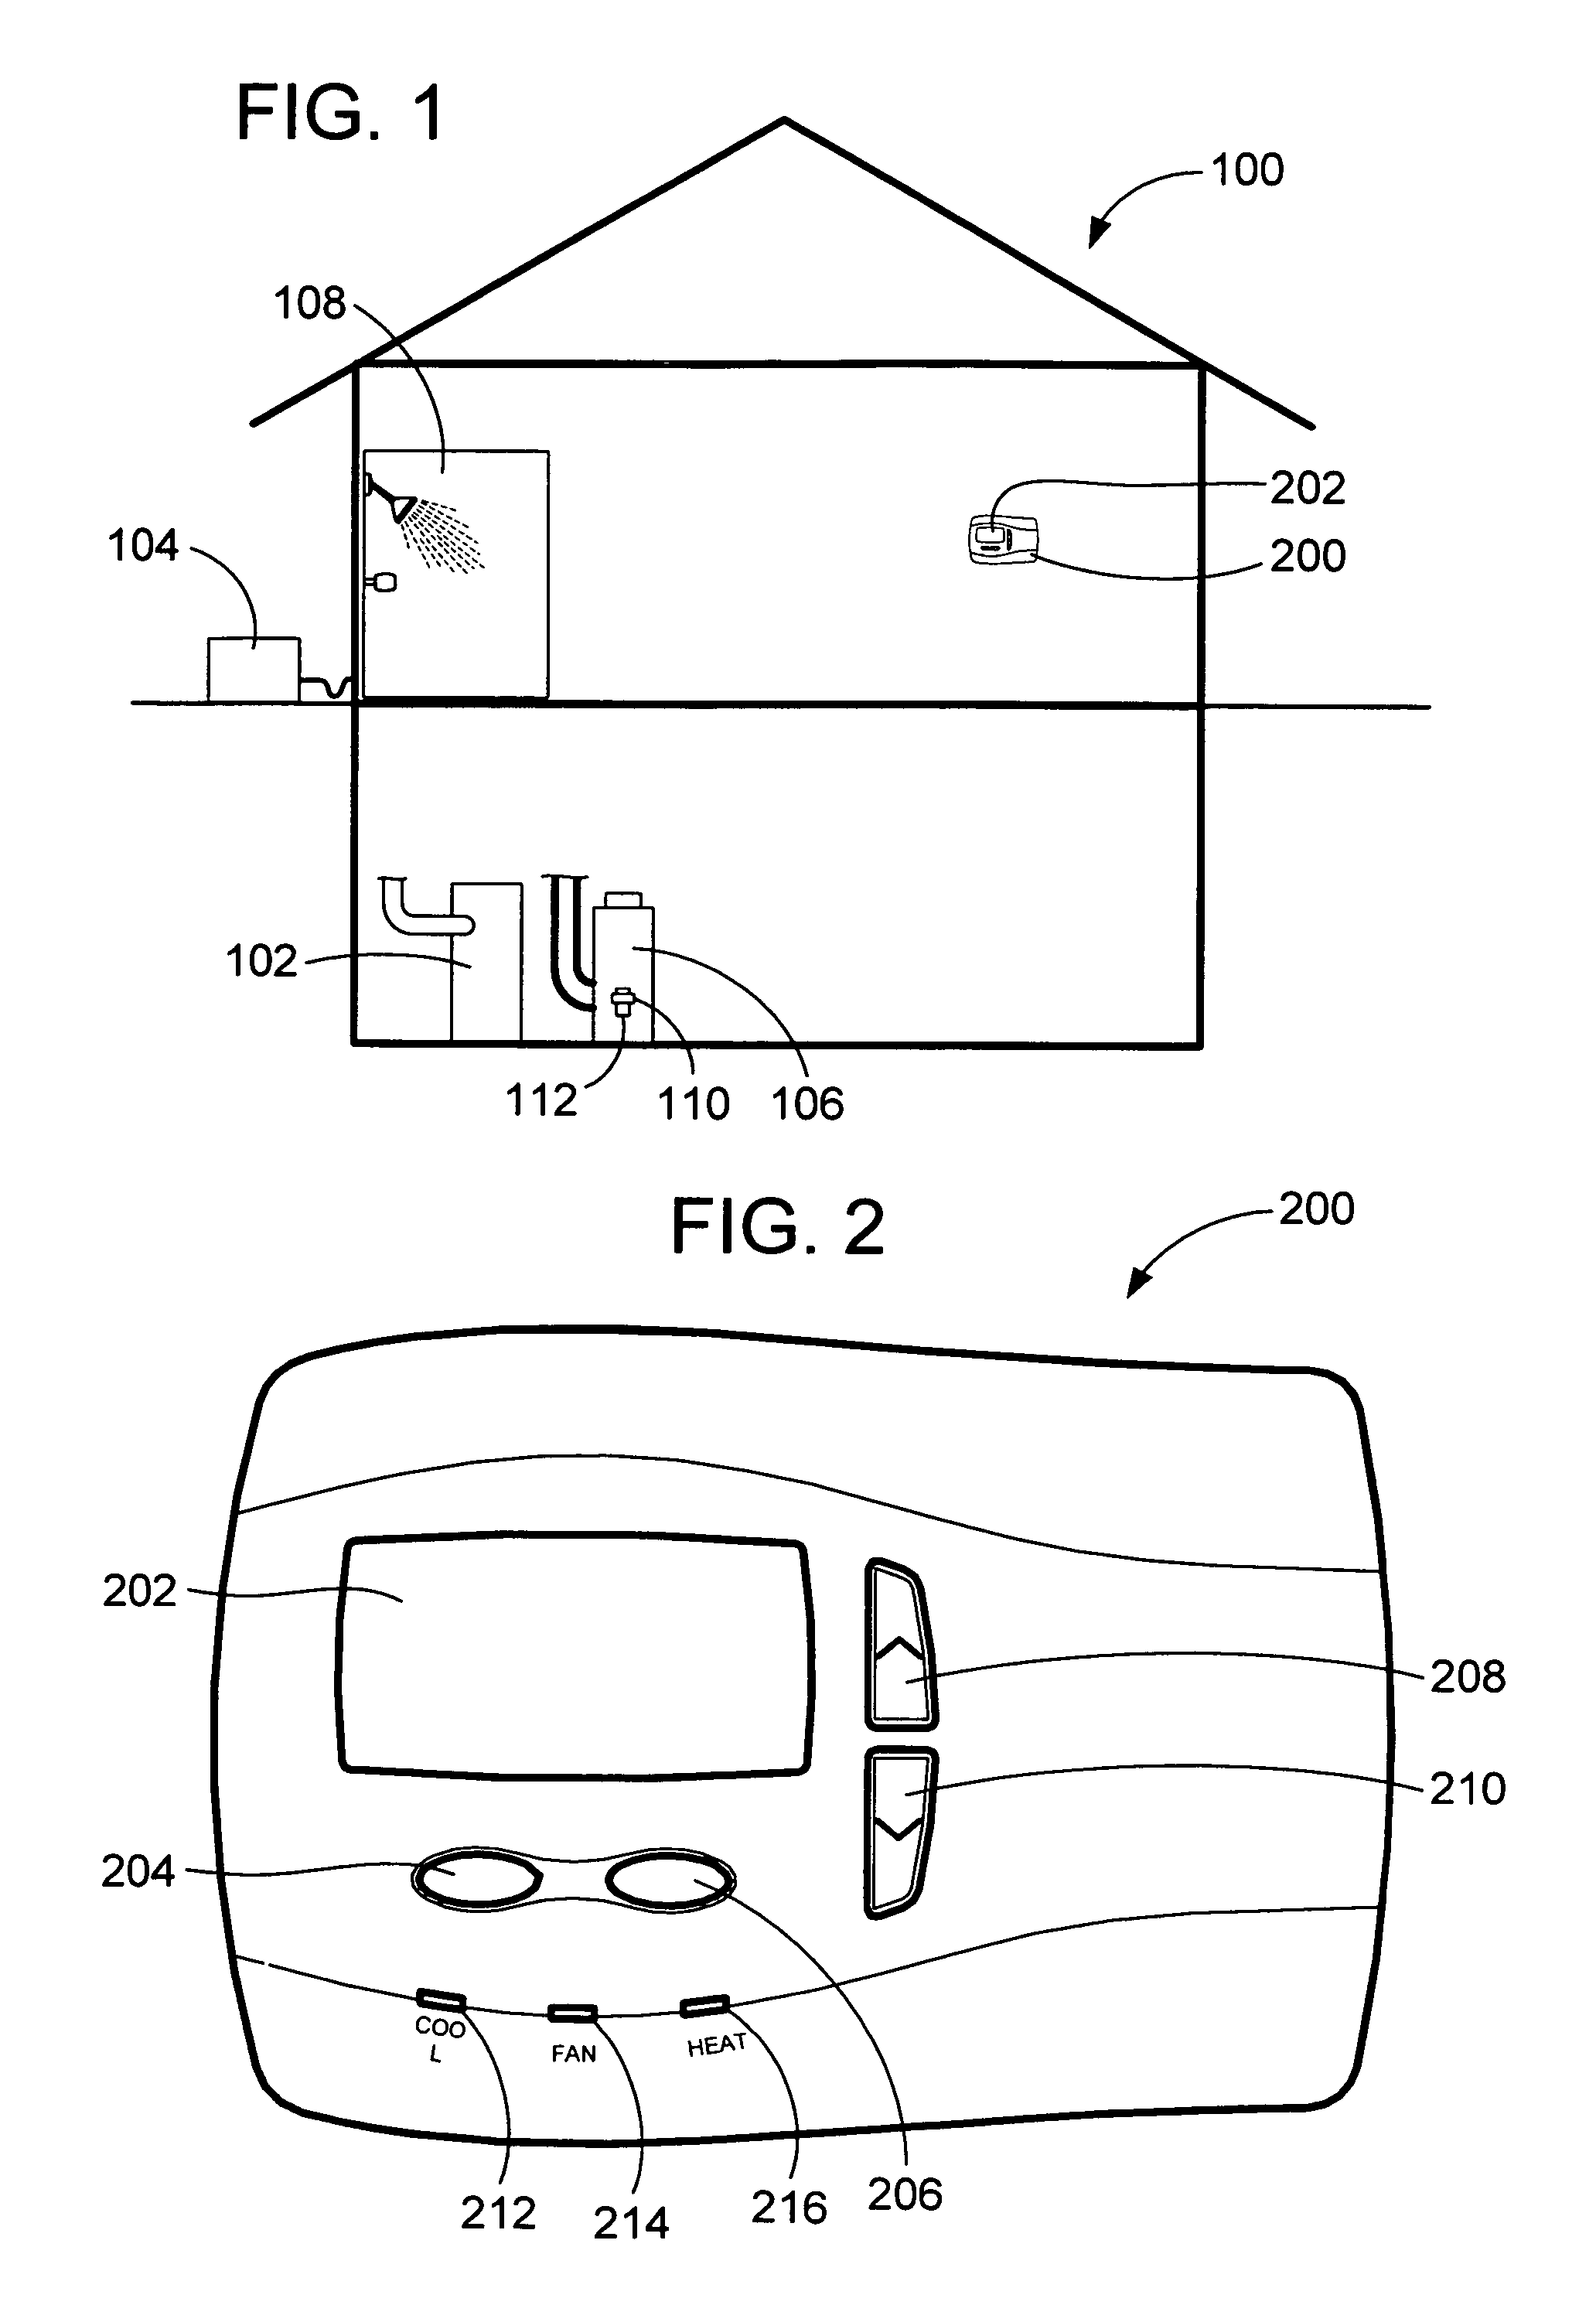 System and method for reducing energy consumption by controlling a water heater and HVAC system via a thermostat and thermostat for use therewith